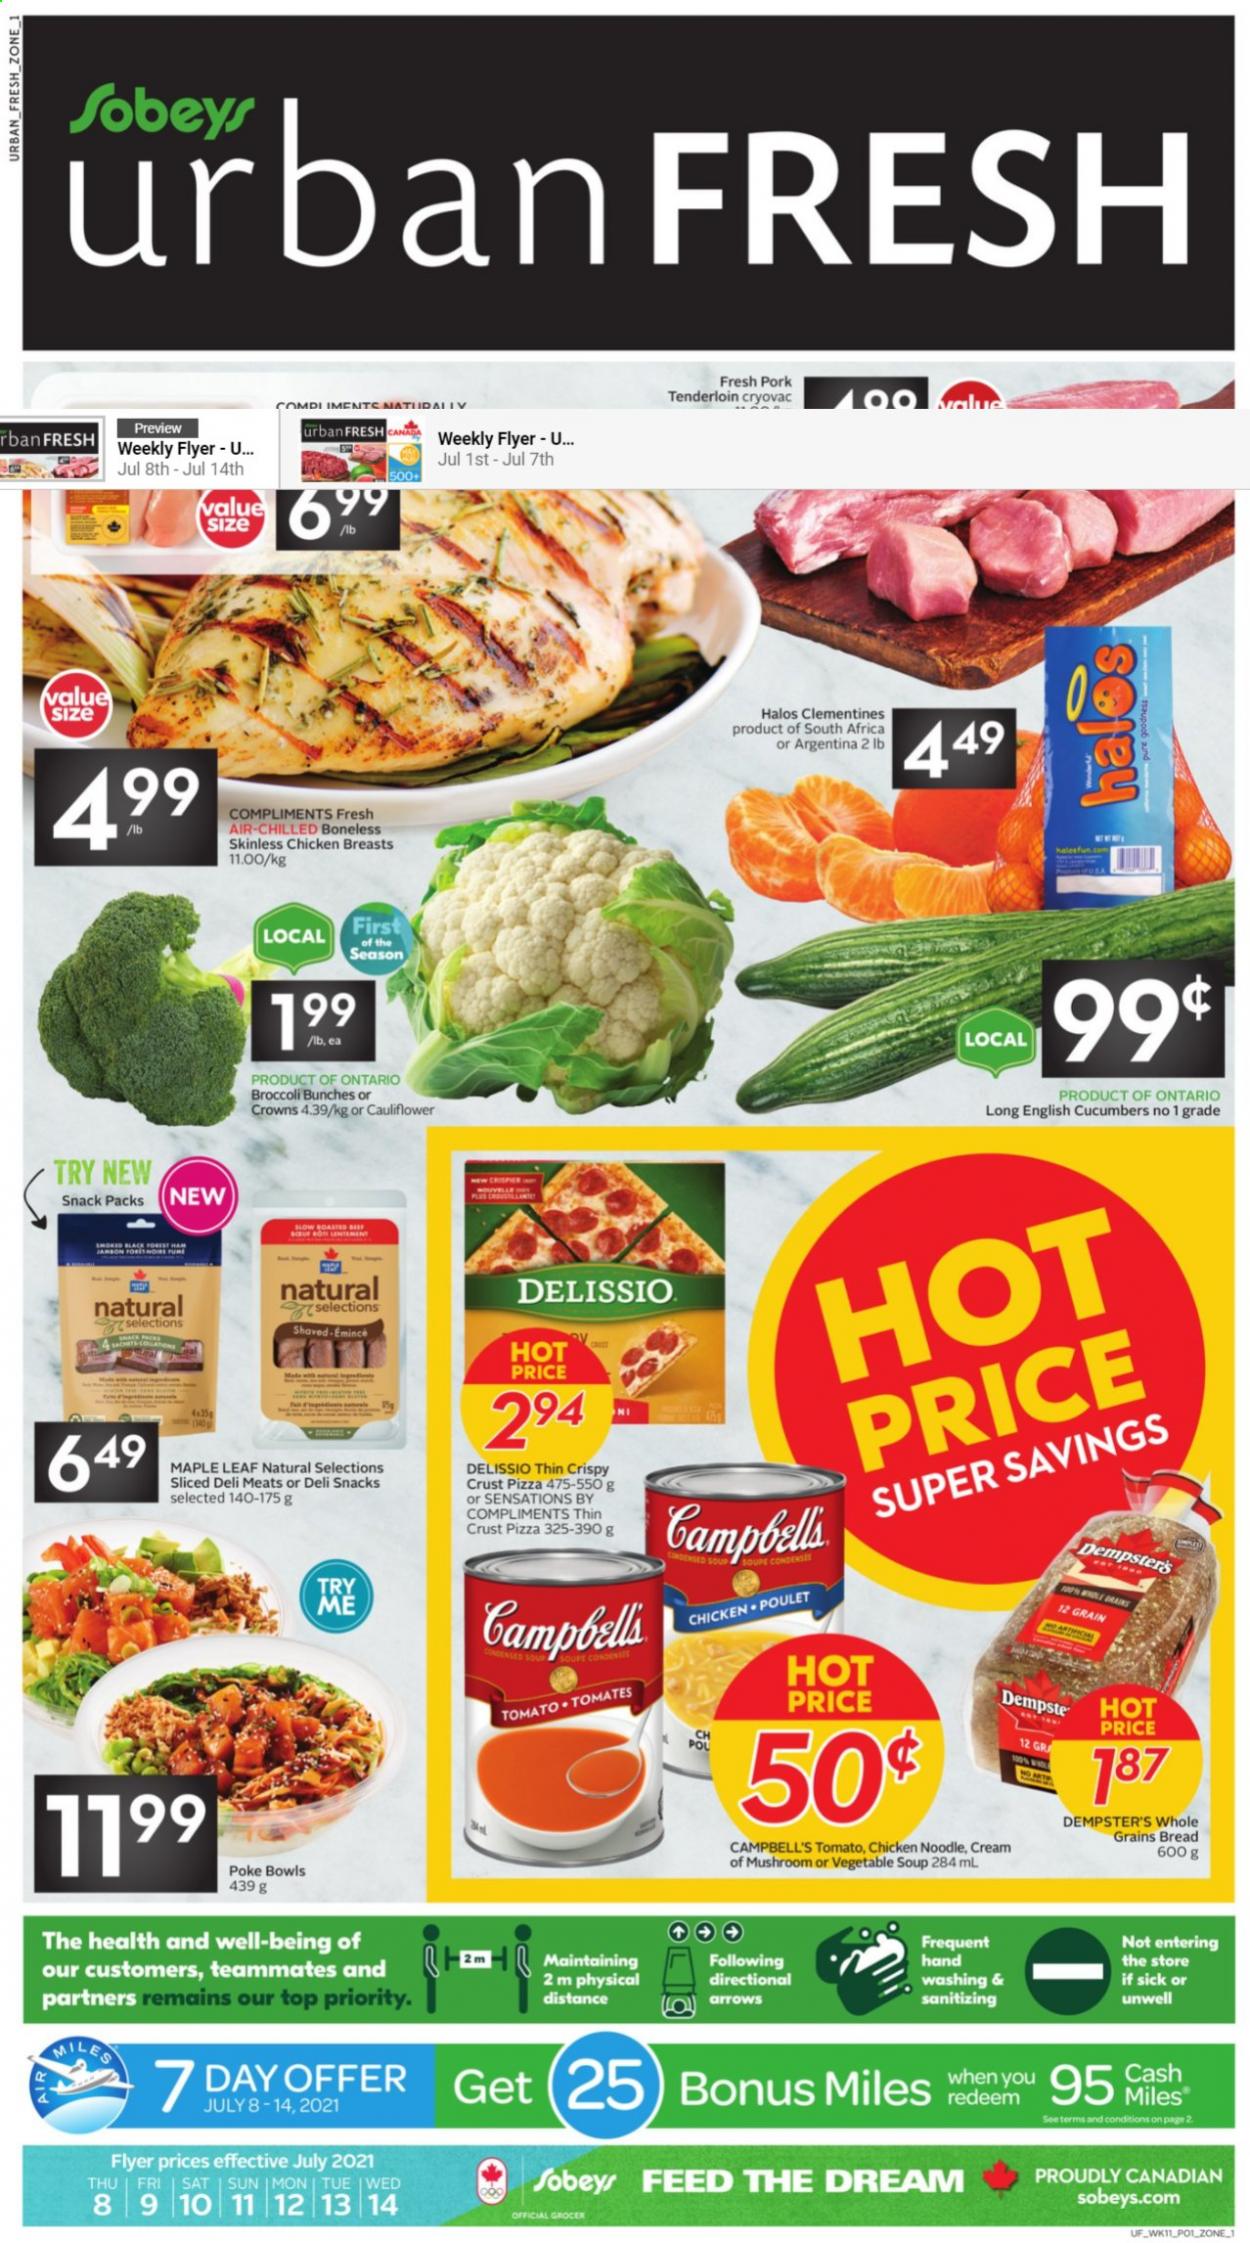 thumbnail - Sobeys Urban Fresh Flyer - July 08, 2021 - July 14, 2021 - Sales products - bread, broccoli, cucumber, clementines, Campbell's, vegetable soup, pizza, soup, noodles, snack, chicken breasts, pork meat, pork tenderloin. Page 1.